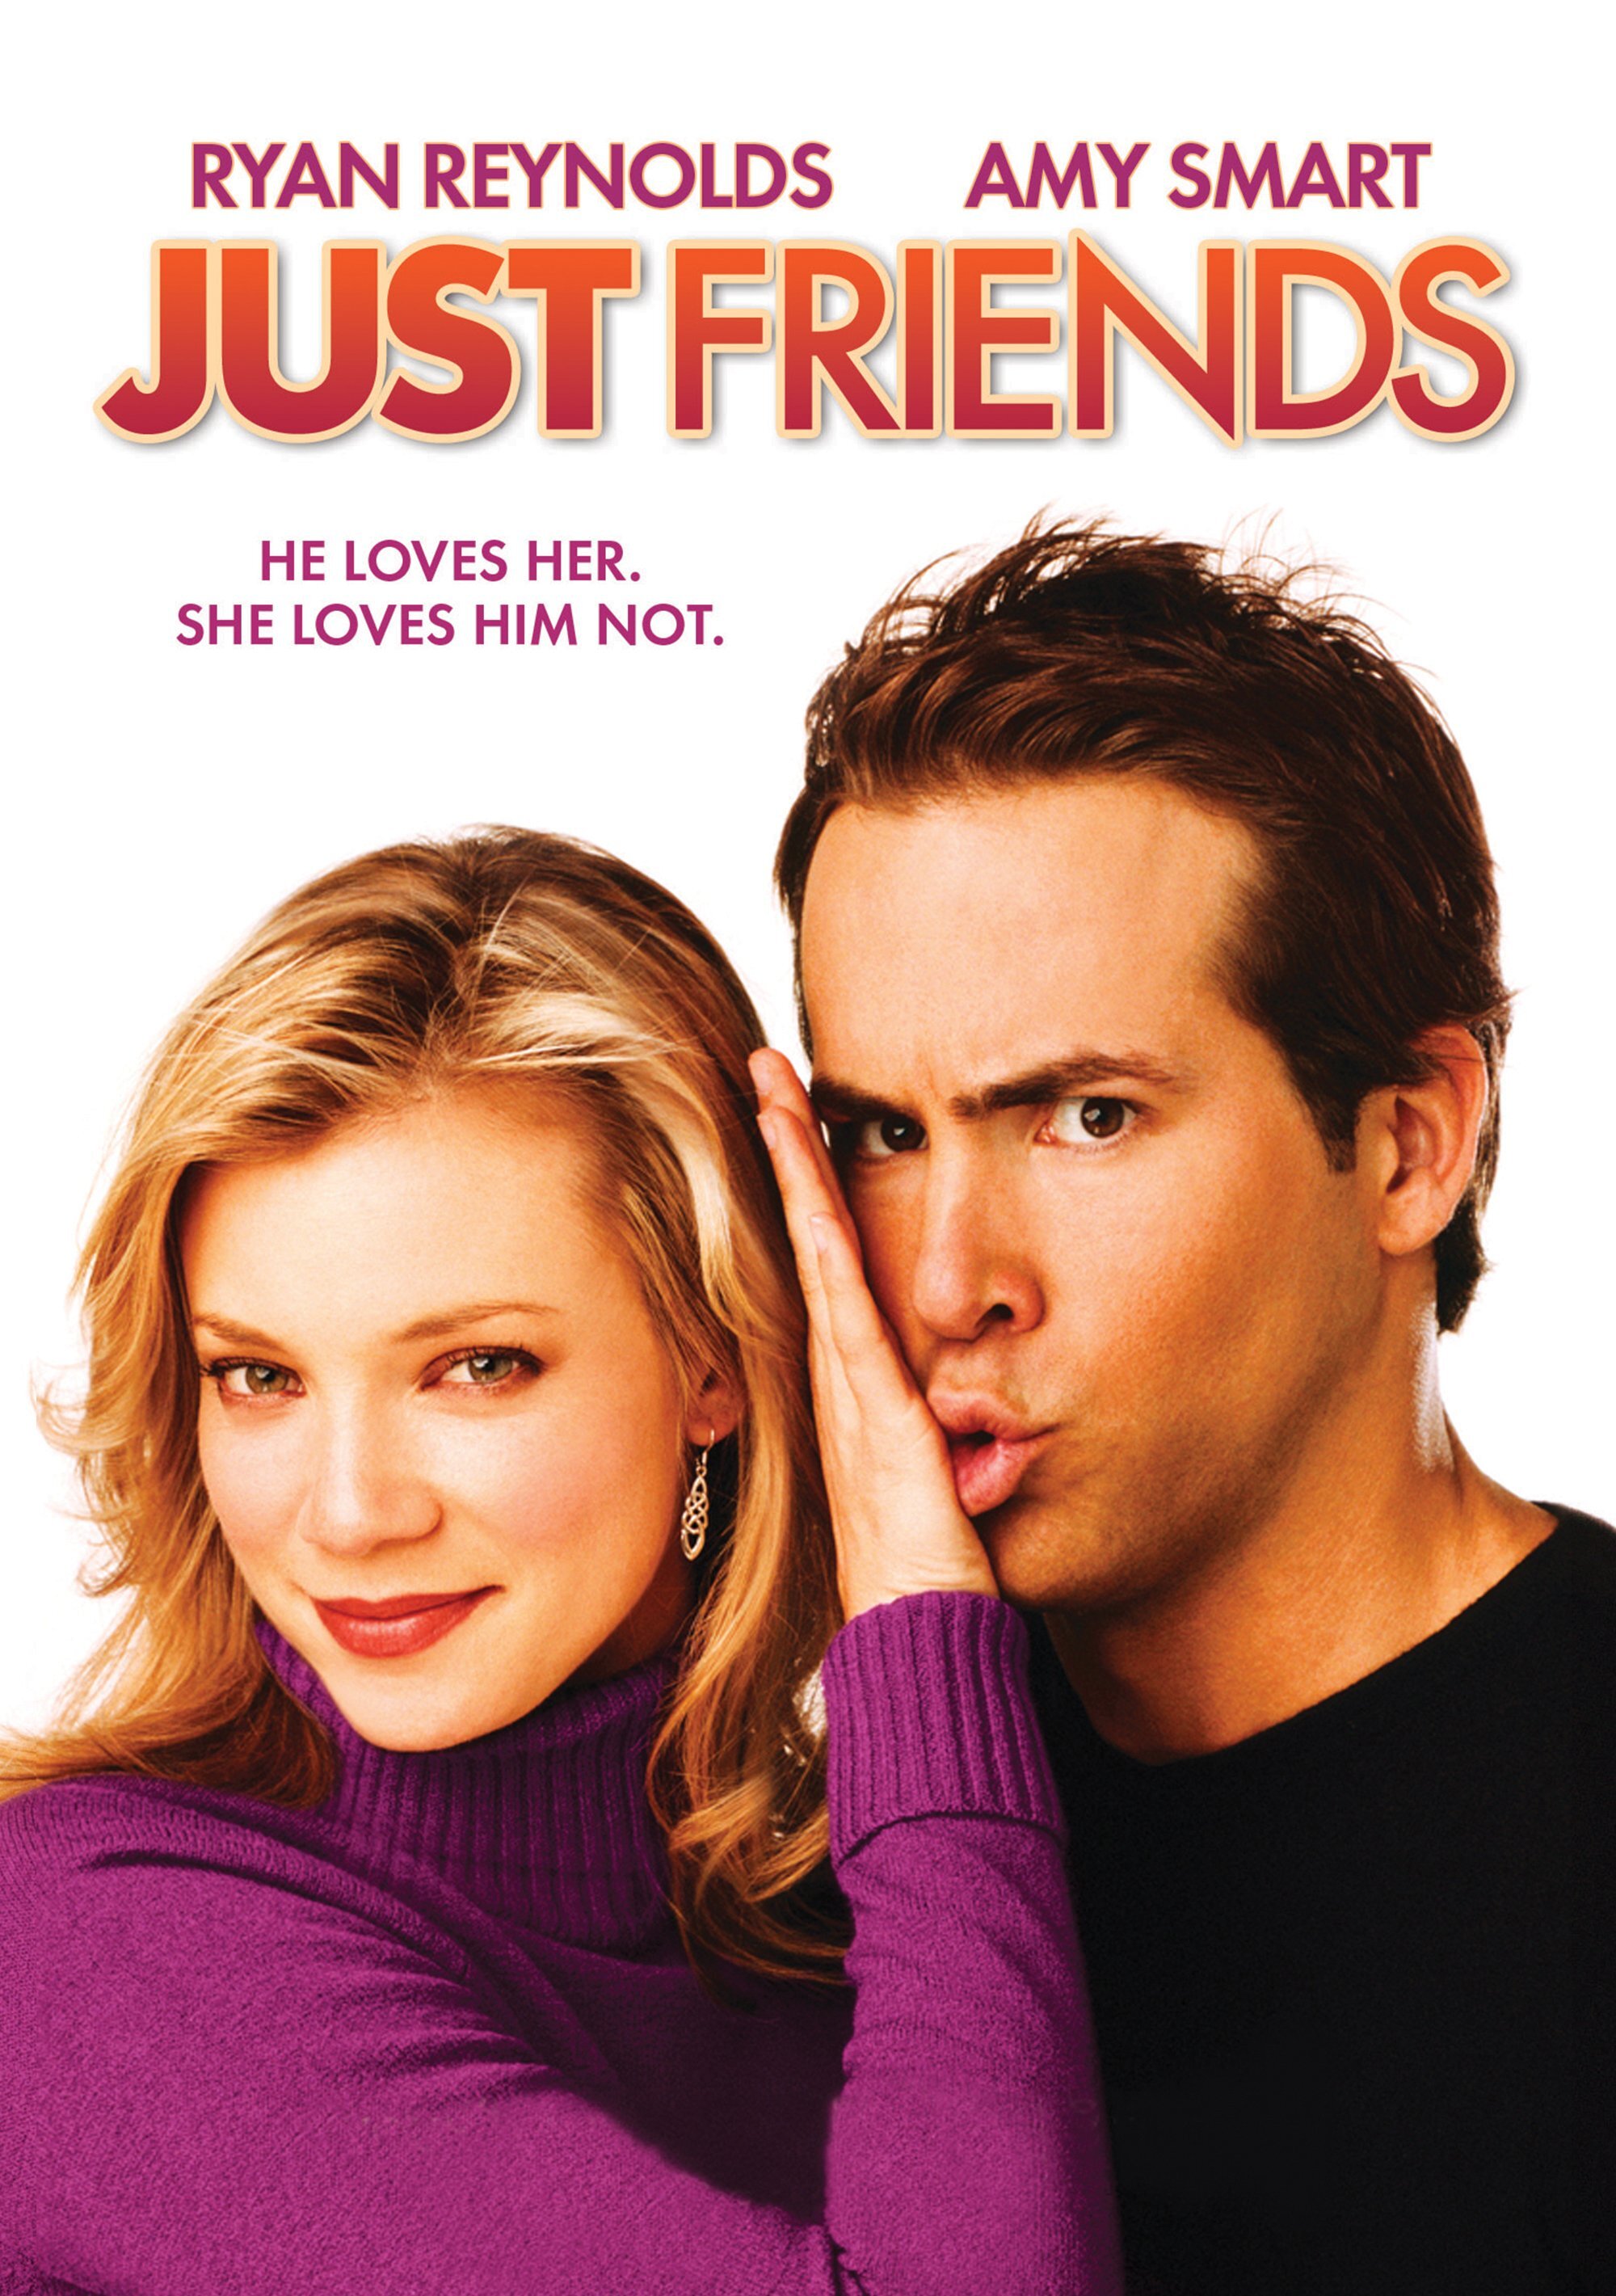 Just Friends (DVD Widescreen) - DVD [ 2005 ]  - Comedy Movies On DVD - Movies On GRUV